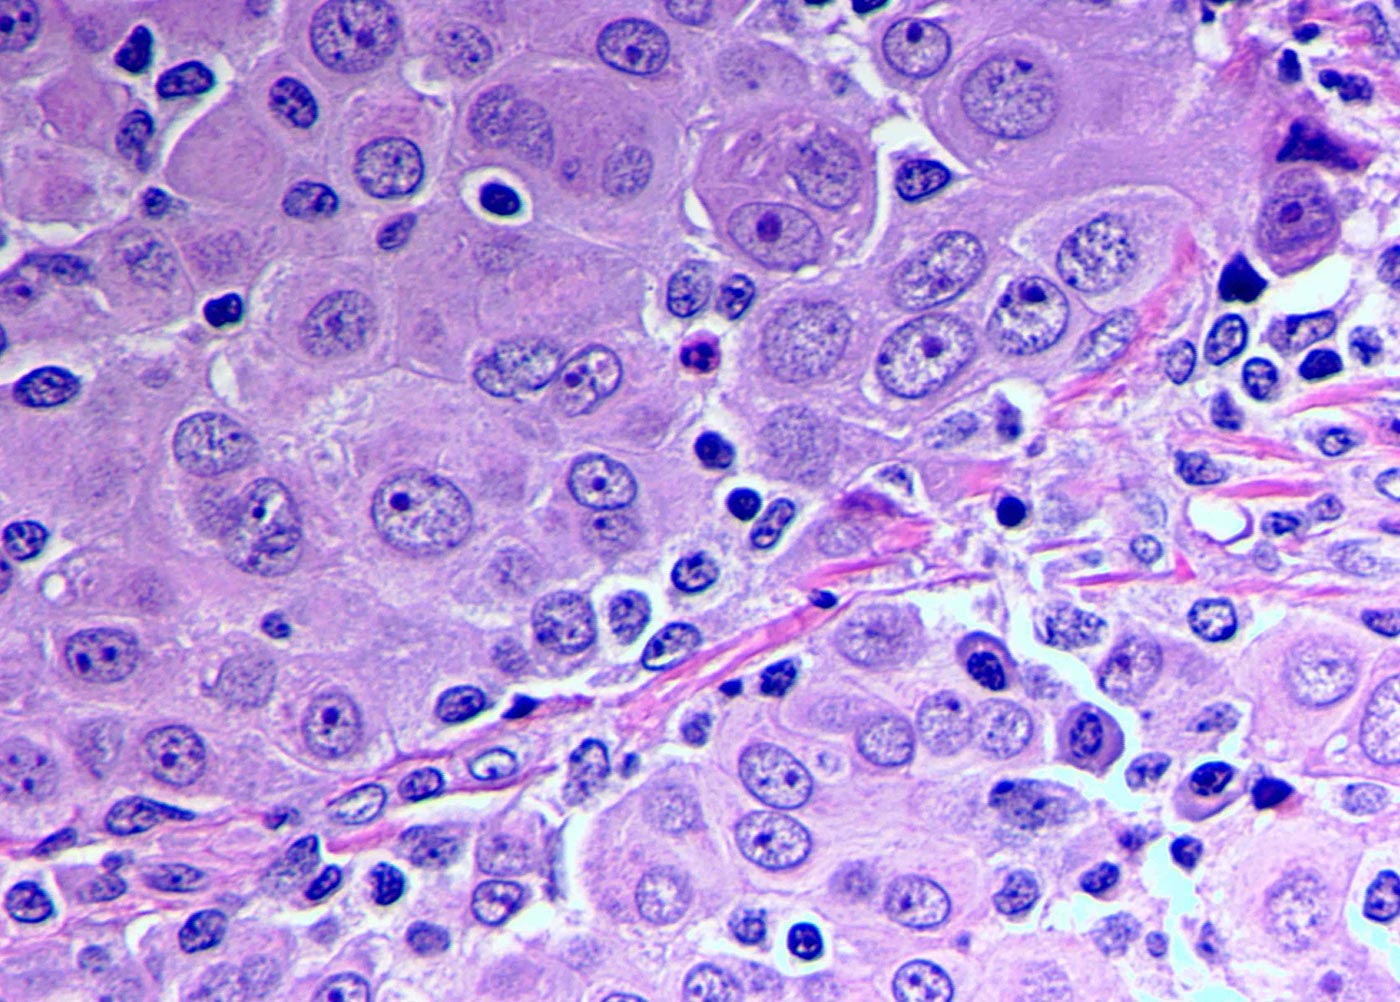 MESO epithelioid cells featured image 1